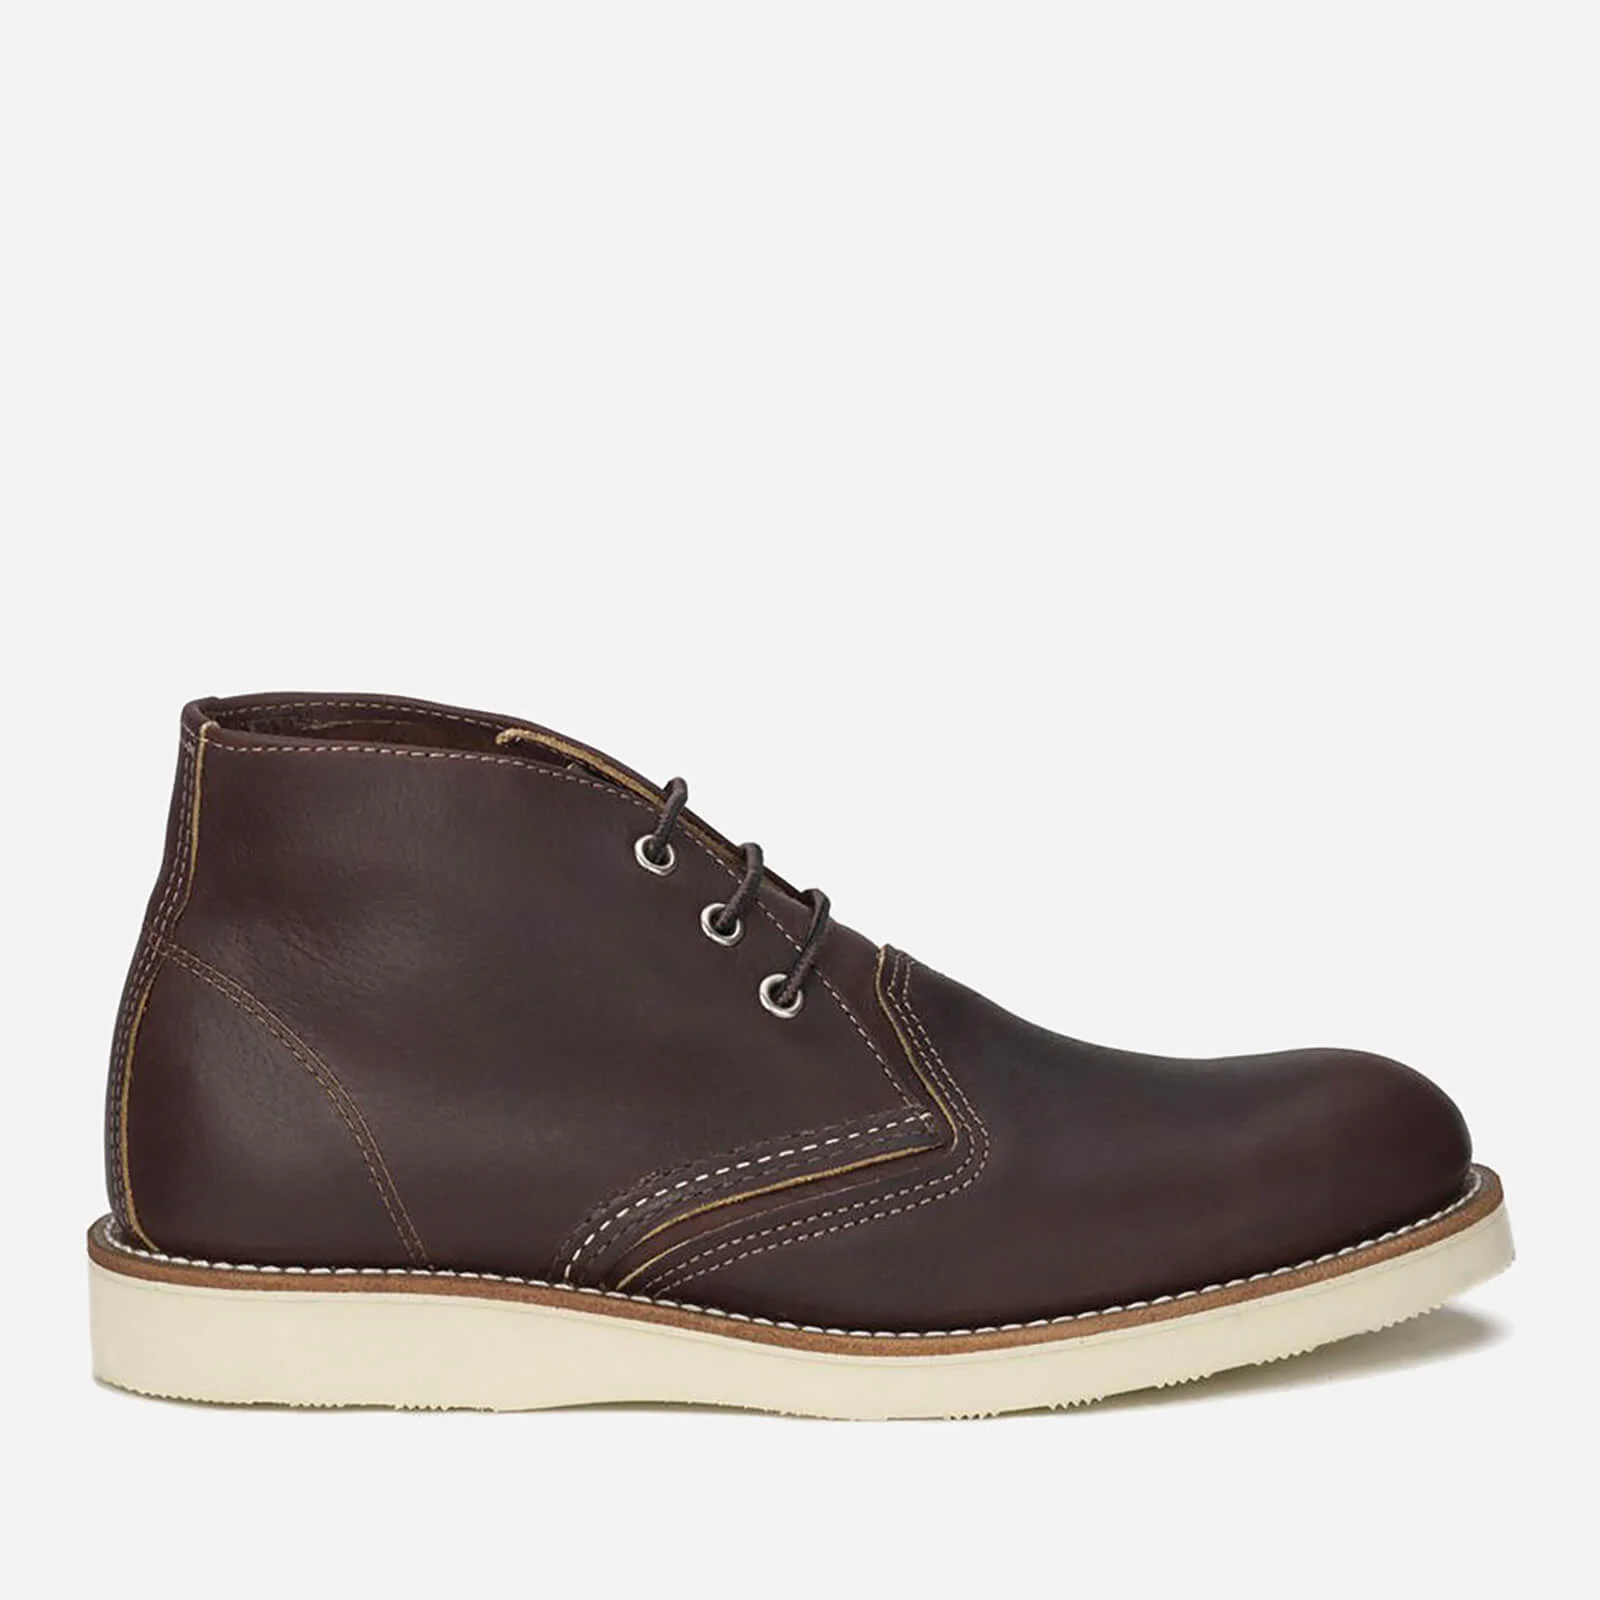 Red Wing Men's Chukka Leather Boots - Briar Oil Slick Image 1